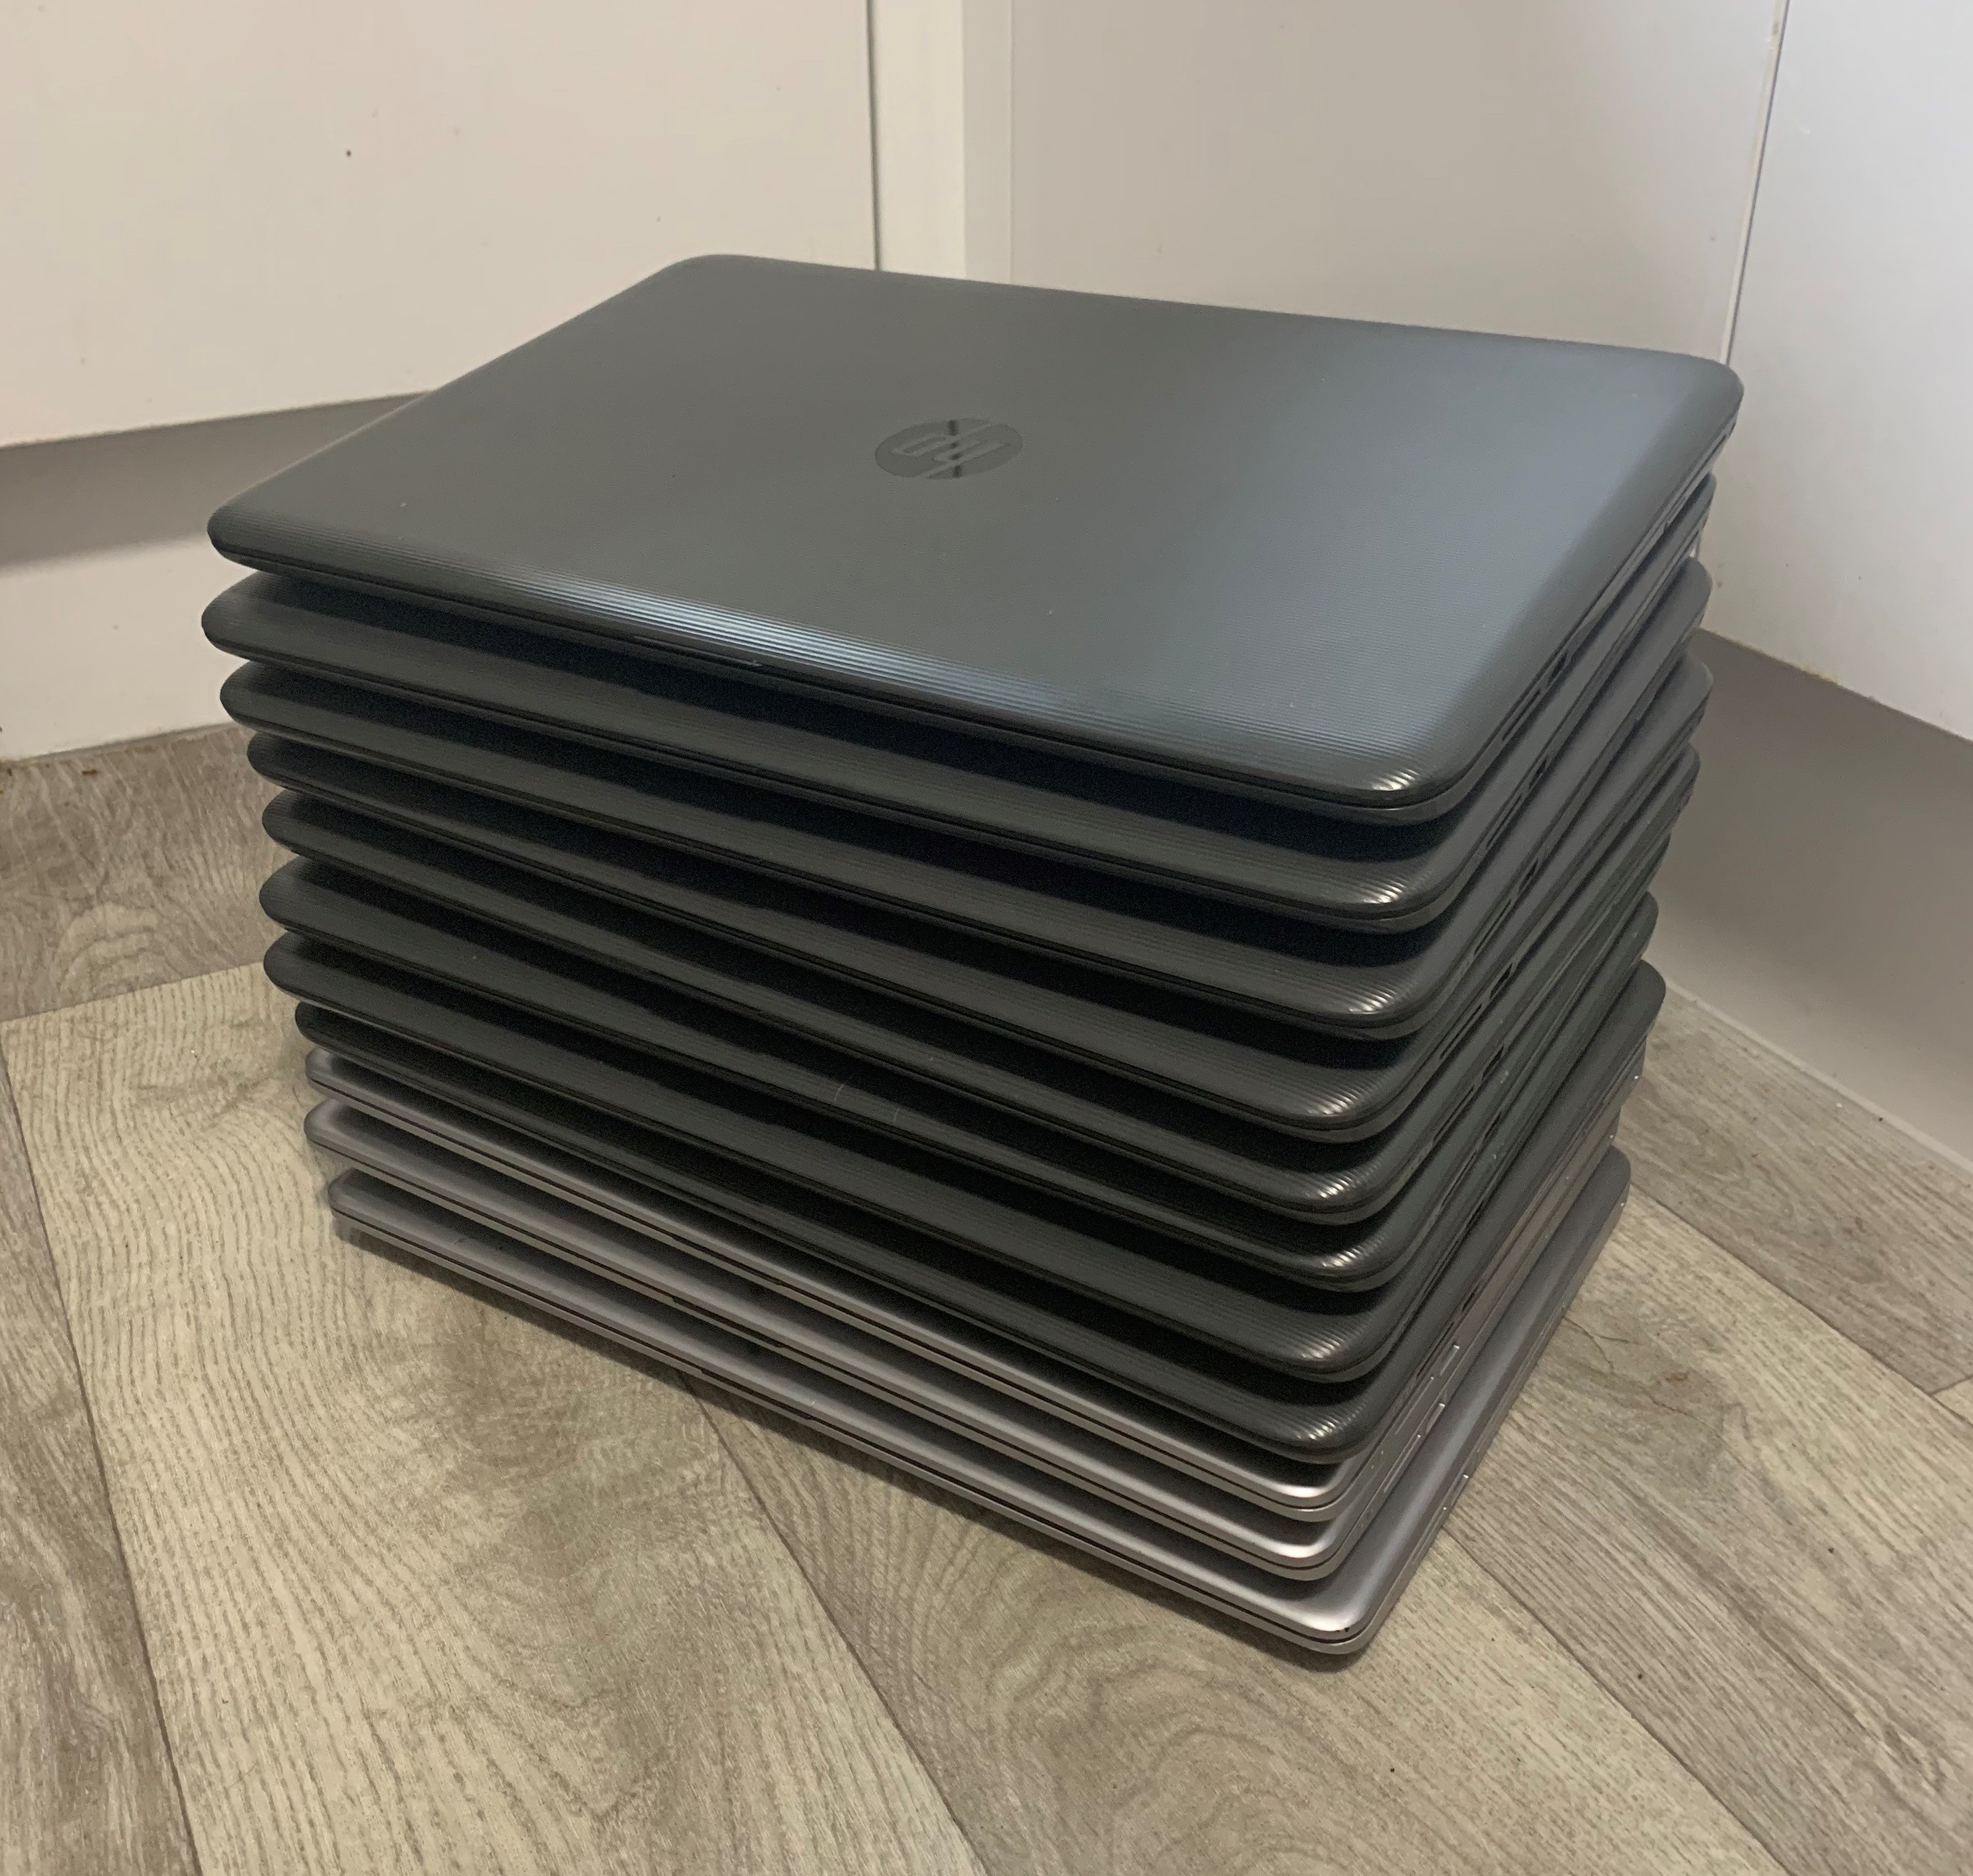 Donating Laptops to a Local School